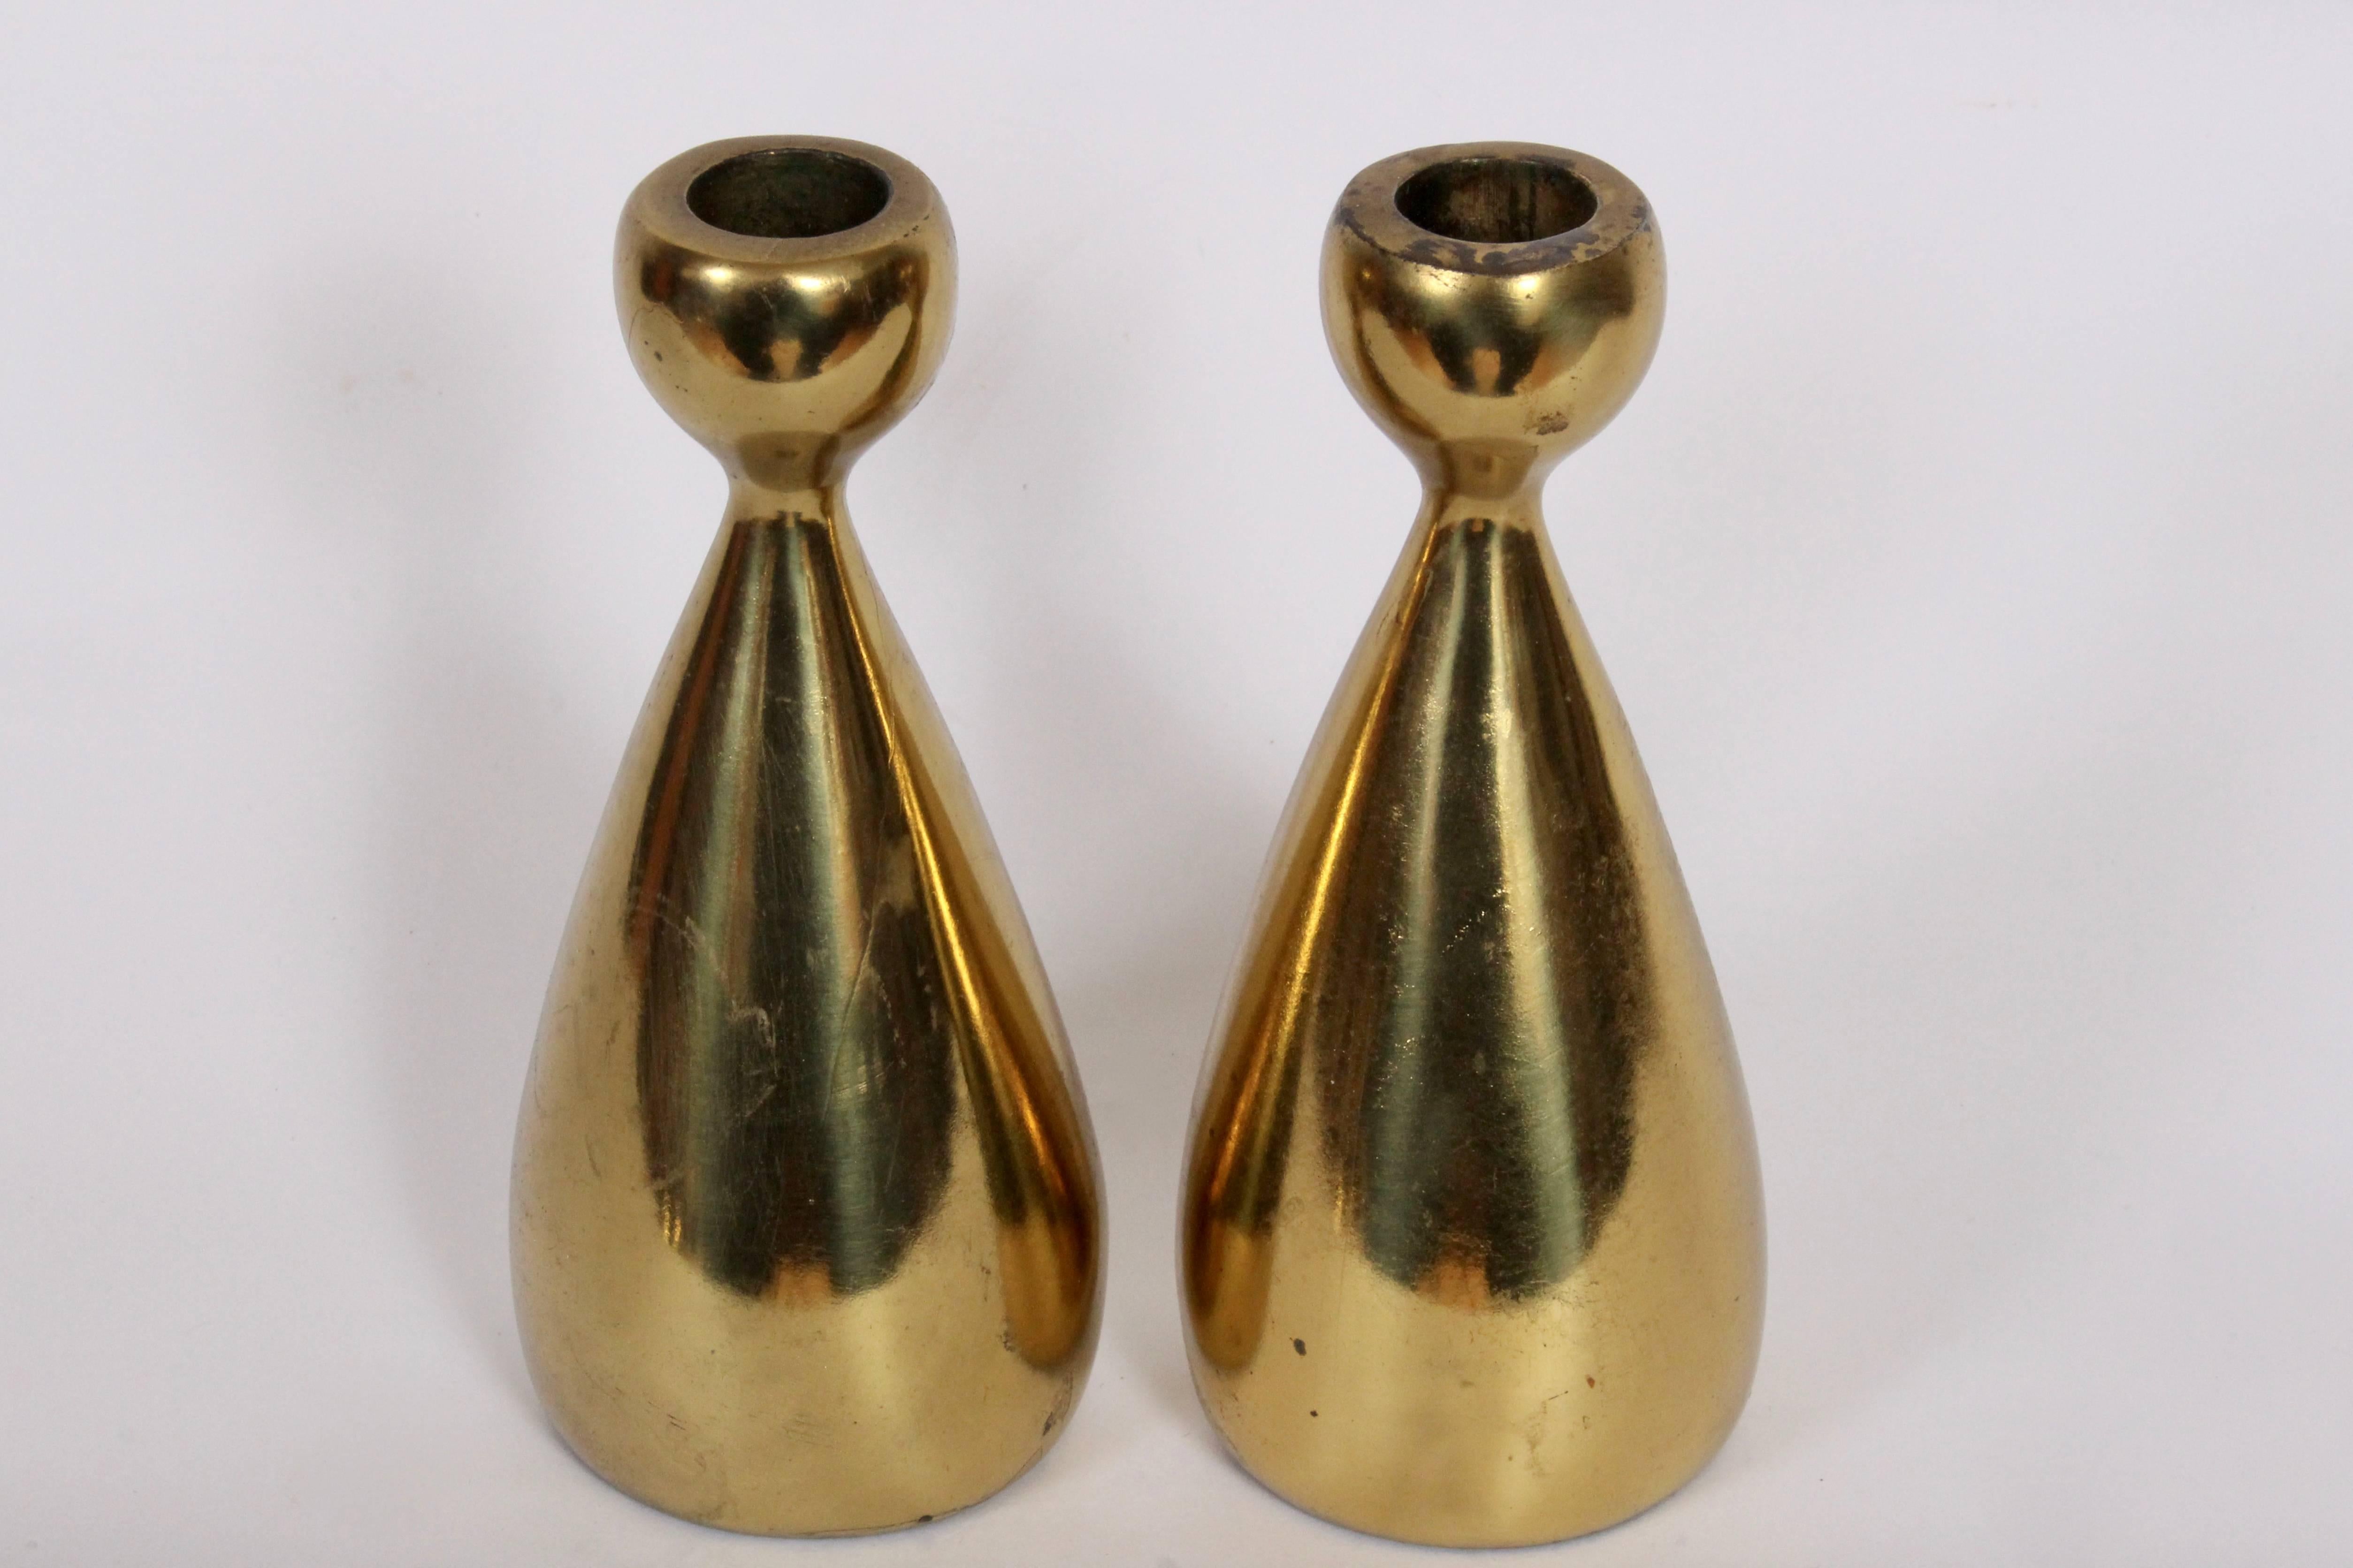 Organic Modern Pair of Brass finished Candlesticks by Ben Seibel for Jenfredware. Utilize taper candles. Sculptural. Reflective. American Mid Century. With label to underside.